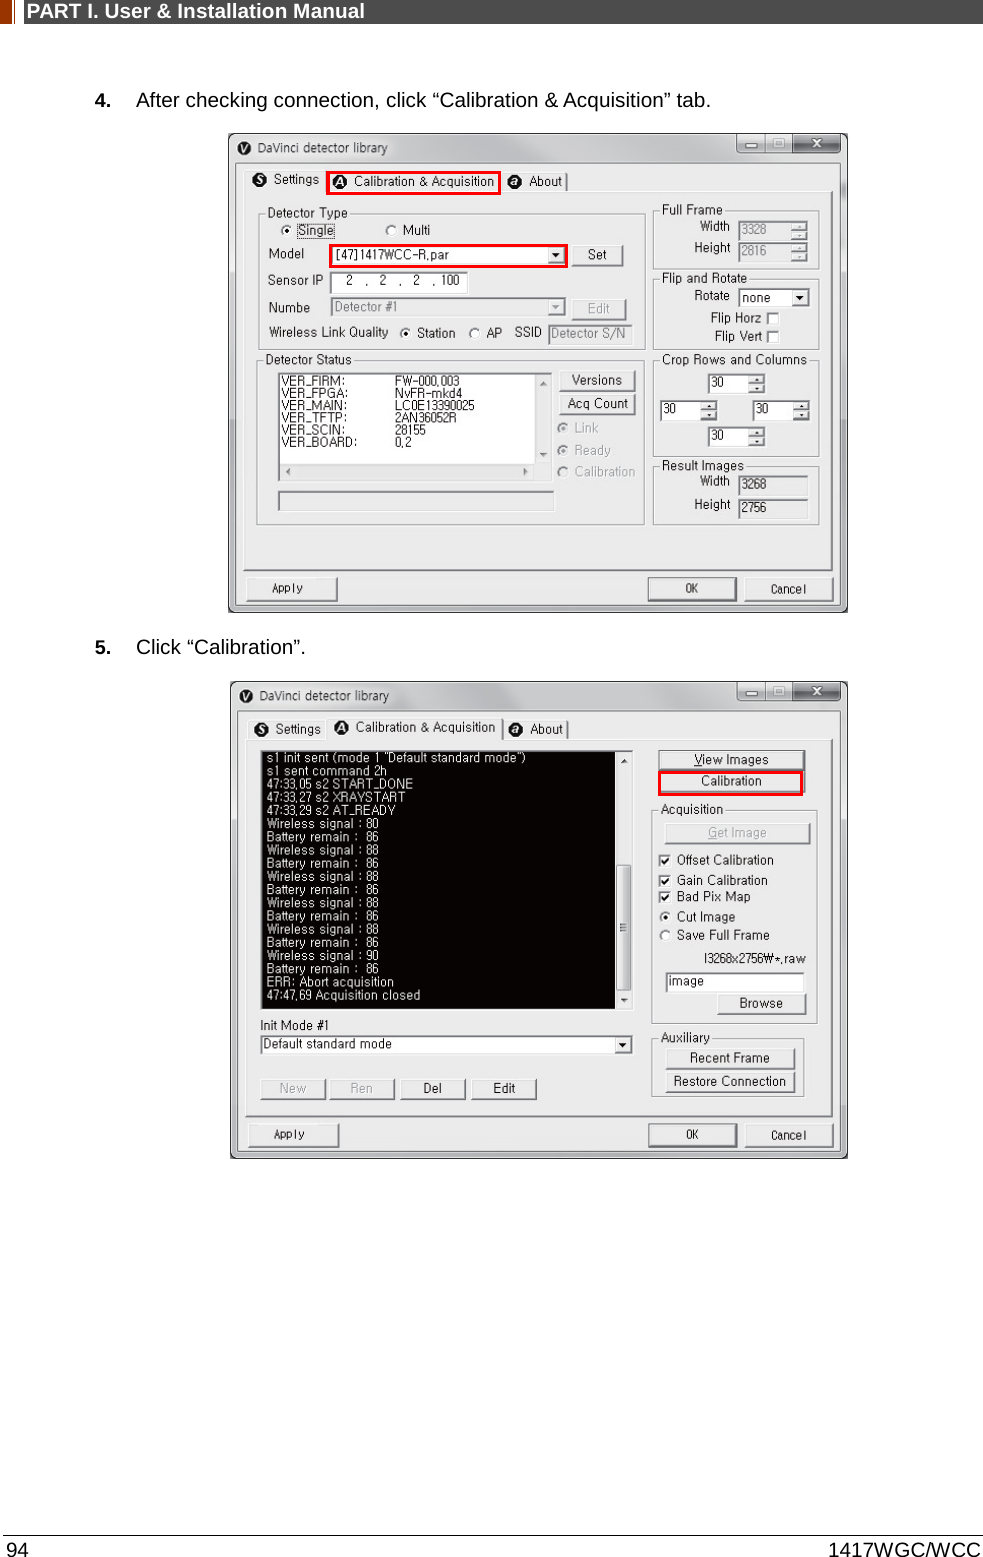 PART I. User &amp; Installation Manual 94 1417WGC/WCC 4. After checking connection, click “Calibration &amp; Acquisition” tab.  5. Click “Calibration”.          